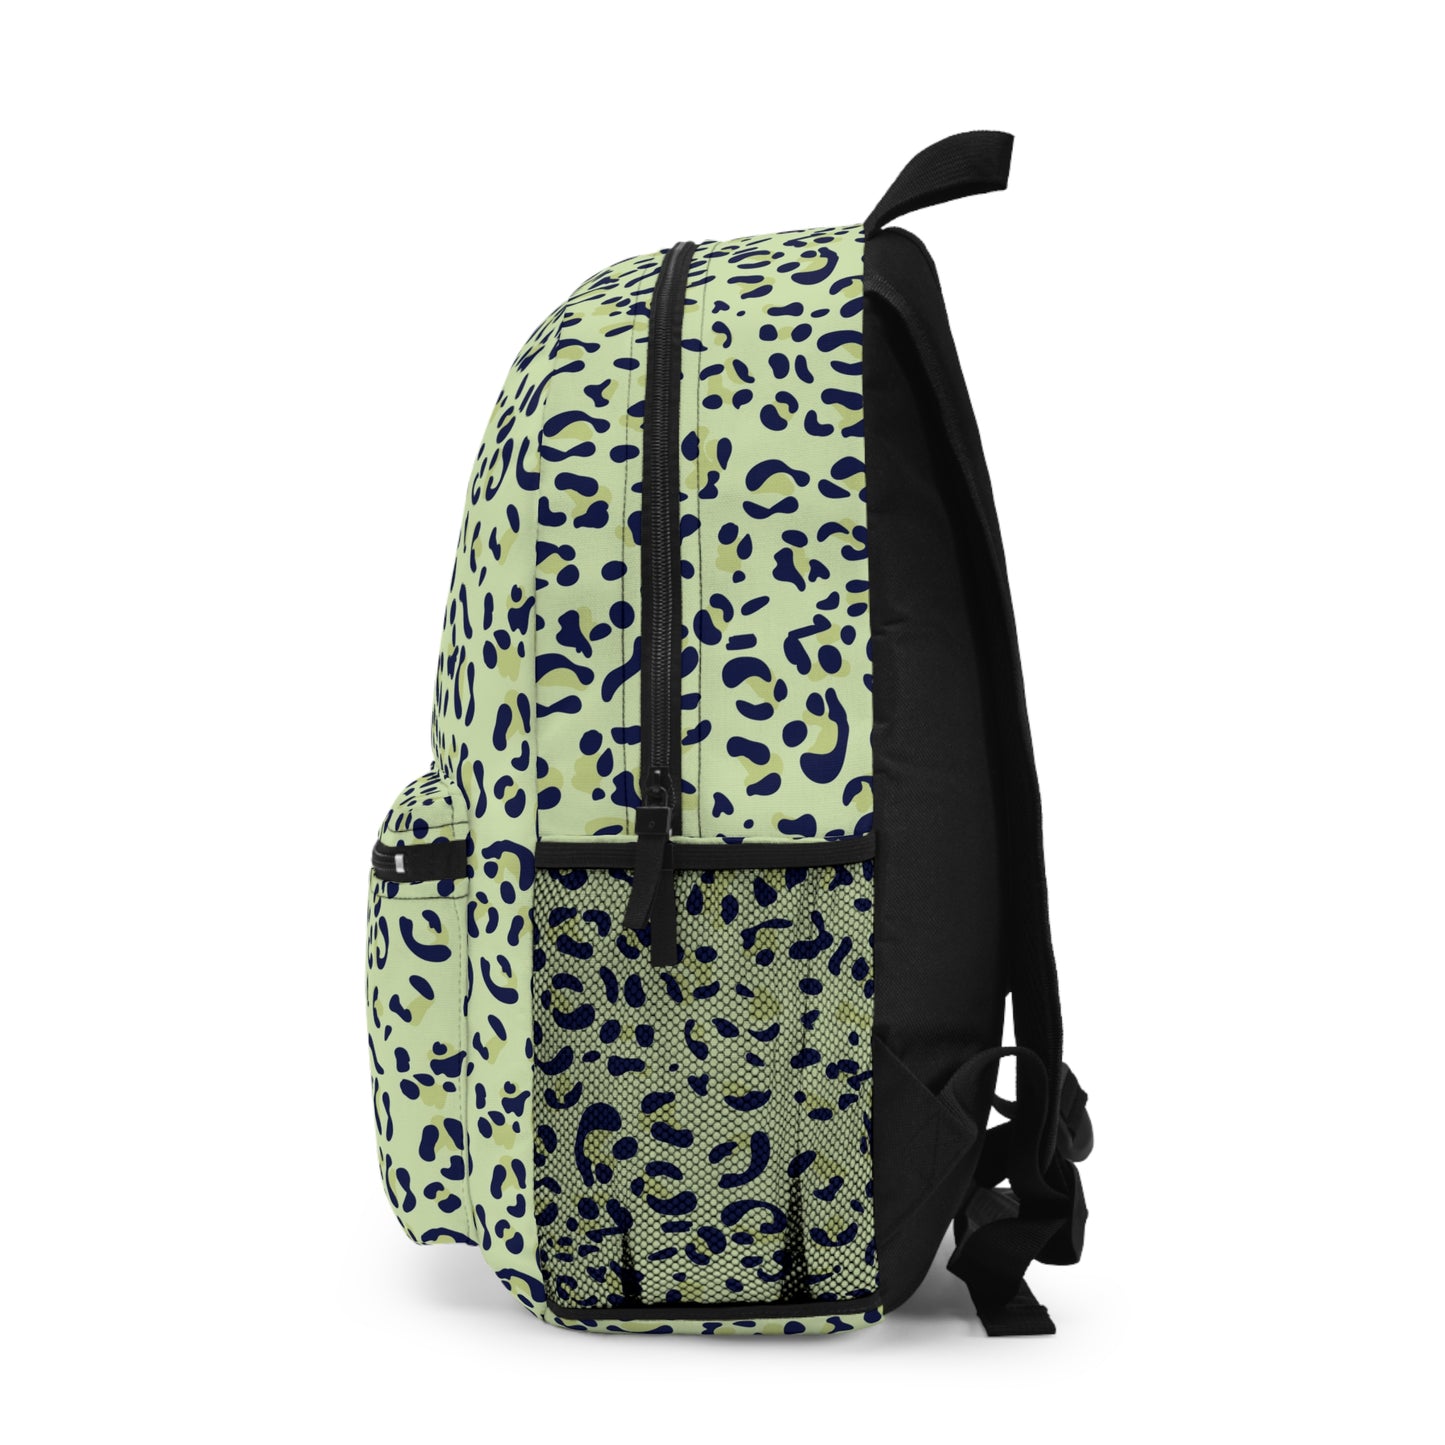 Green Leopard Print Backpack / Girl's Personalized Backpack